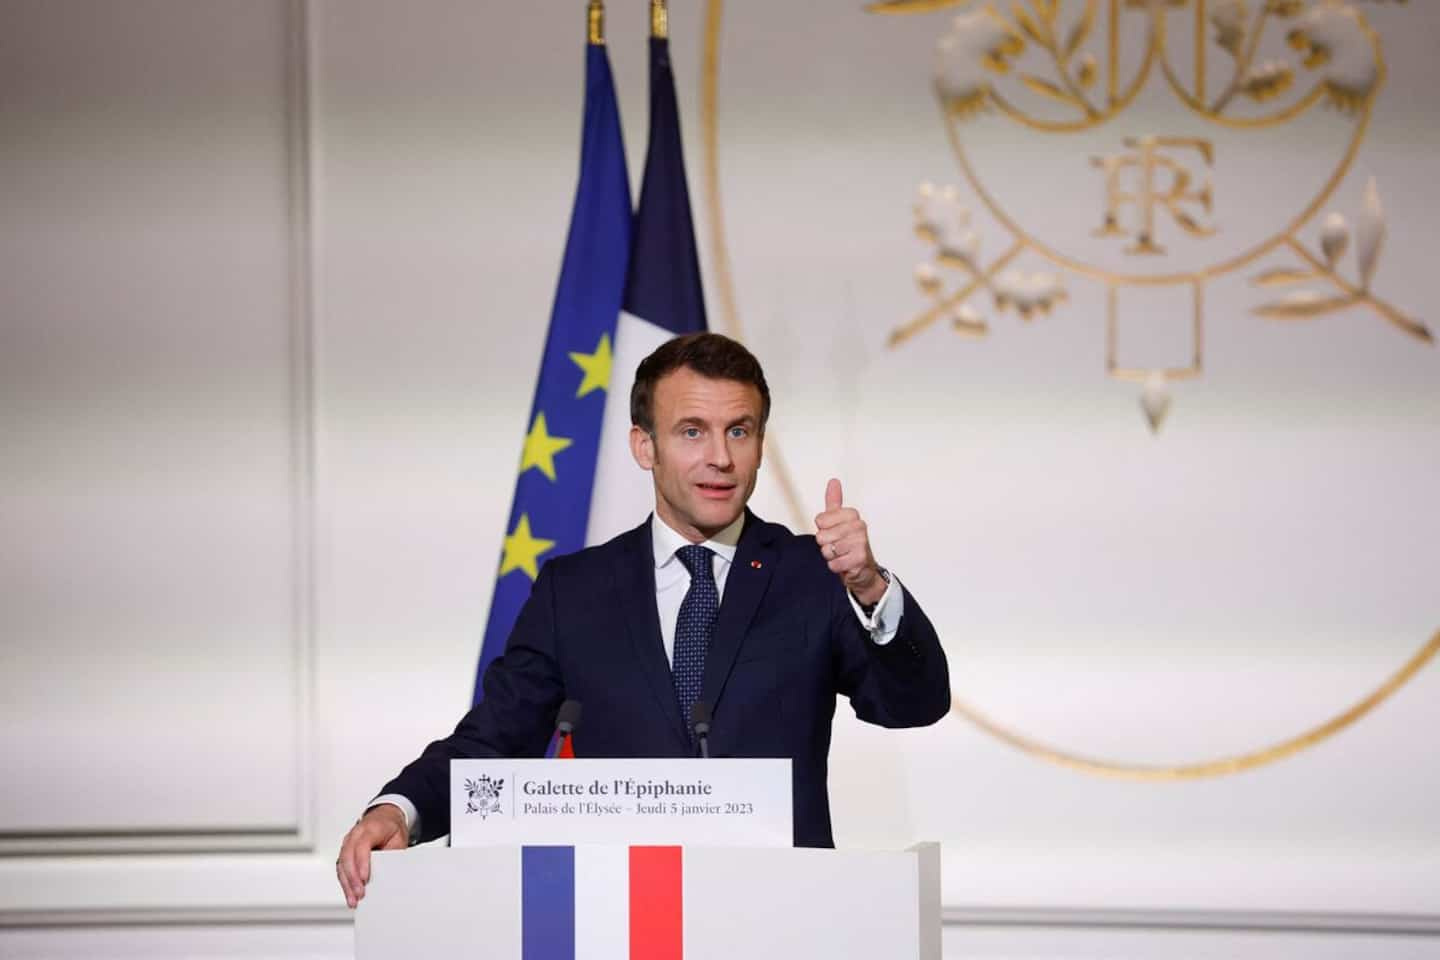 Emmanuel Macron unveils his plan for a French health system that is sinking into crisis